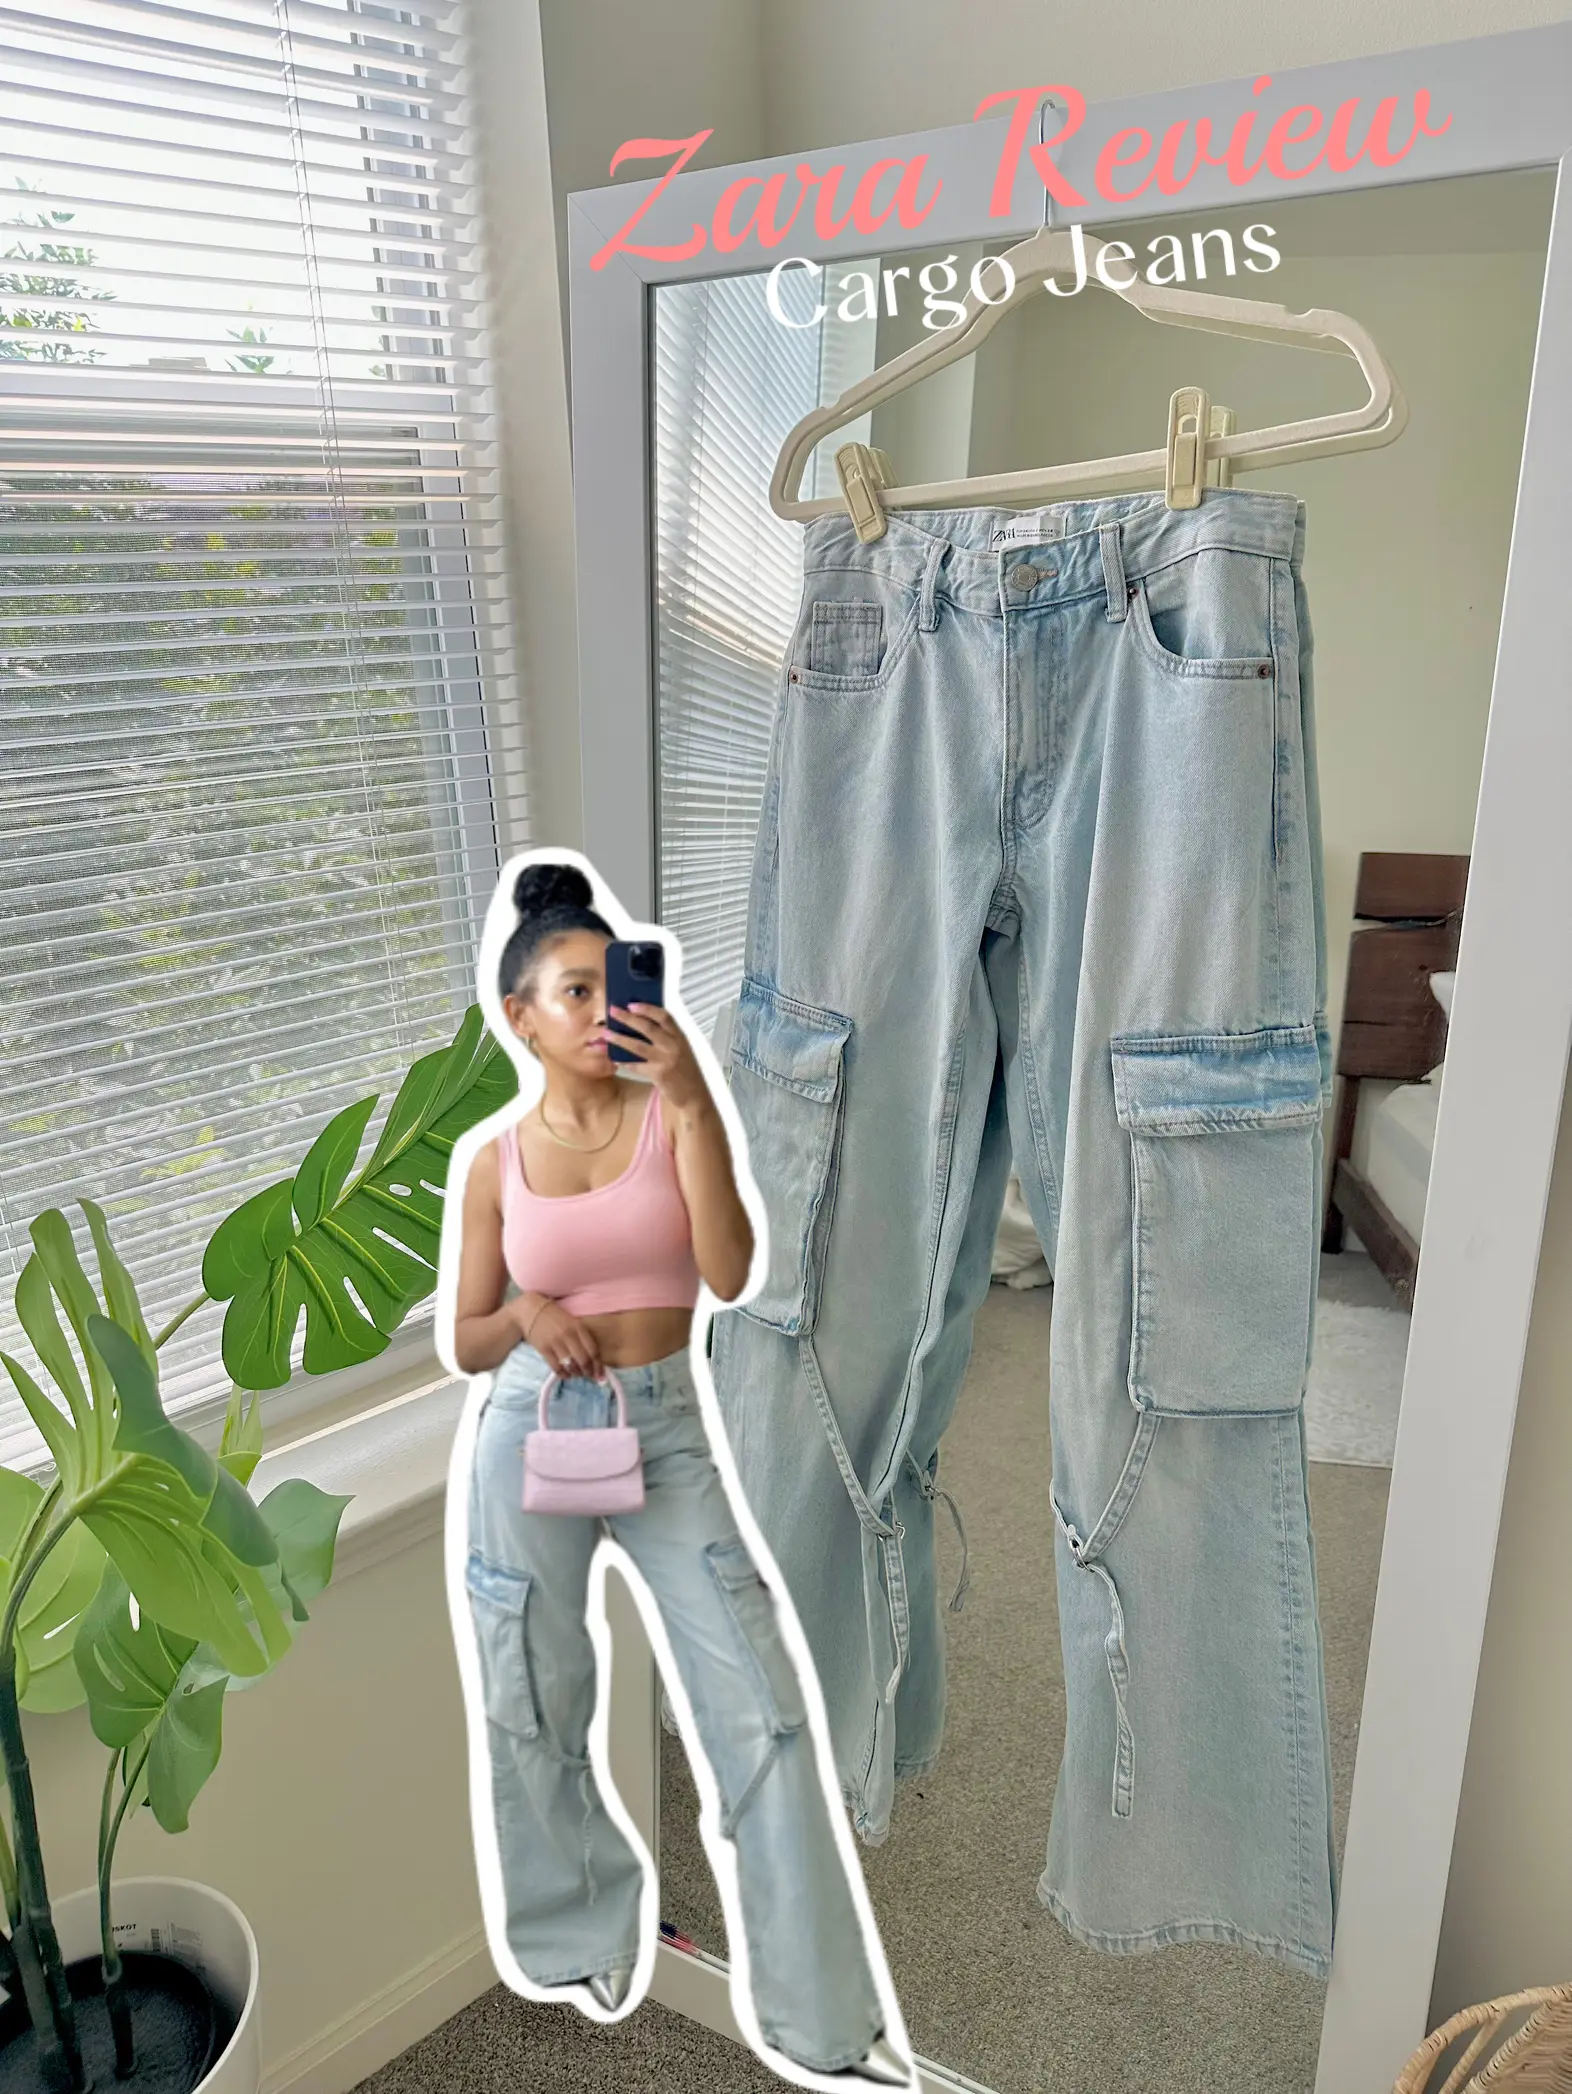 I'm a fashion fan - I tried Zara's high waisted pants in different